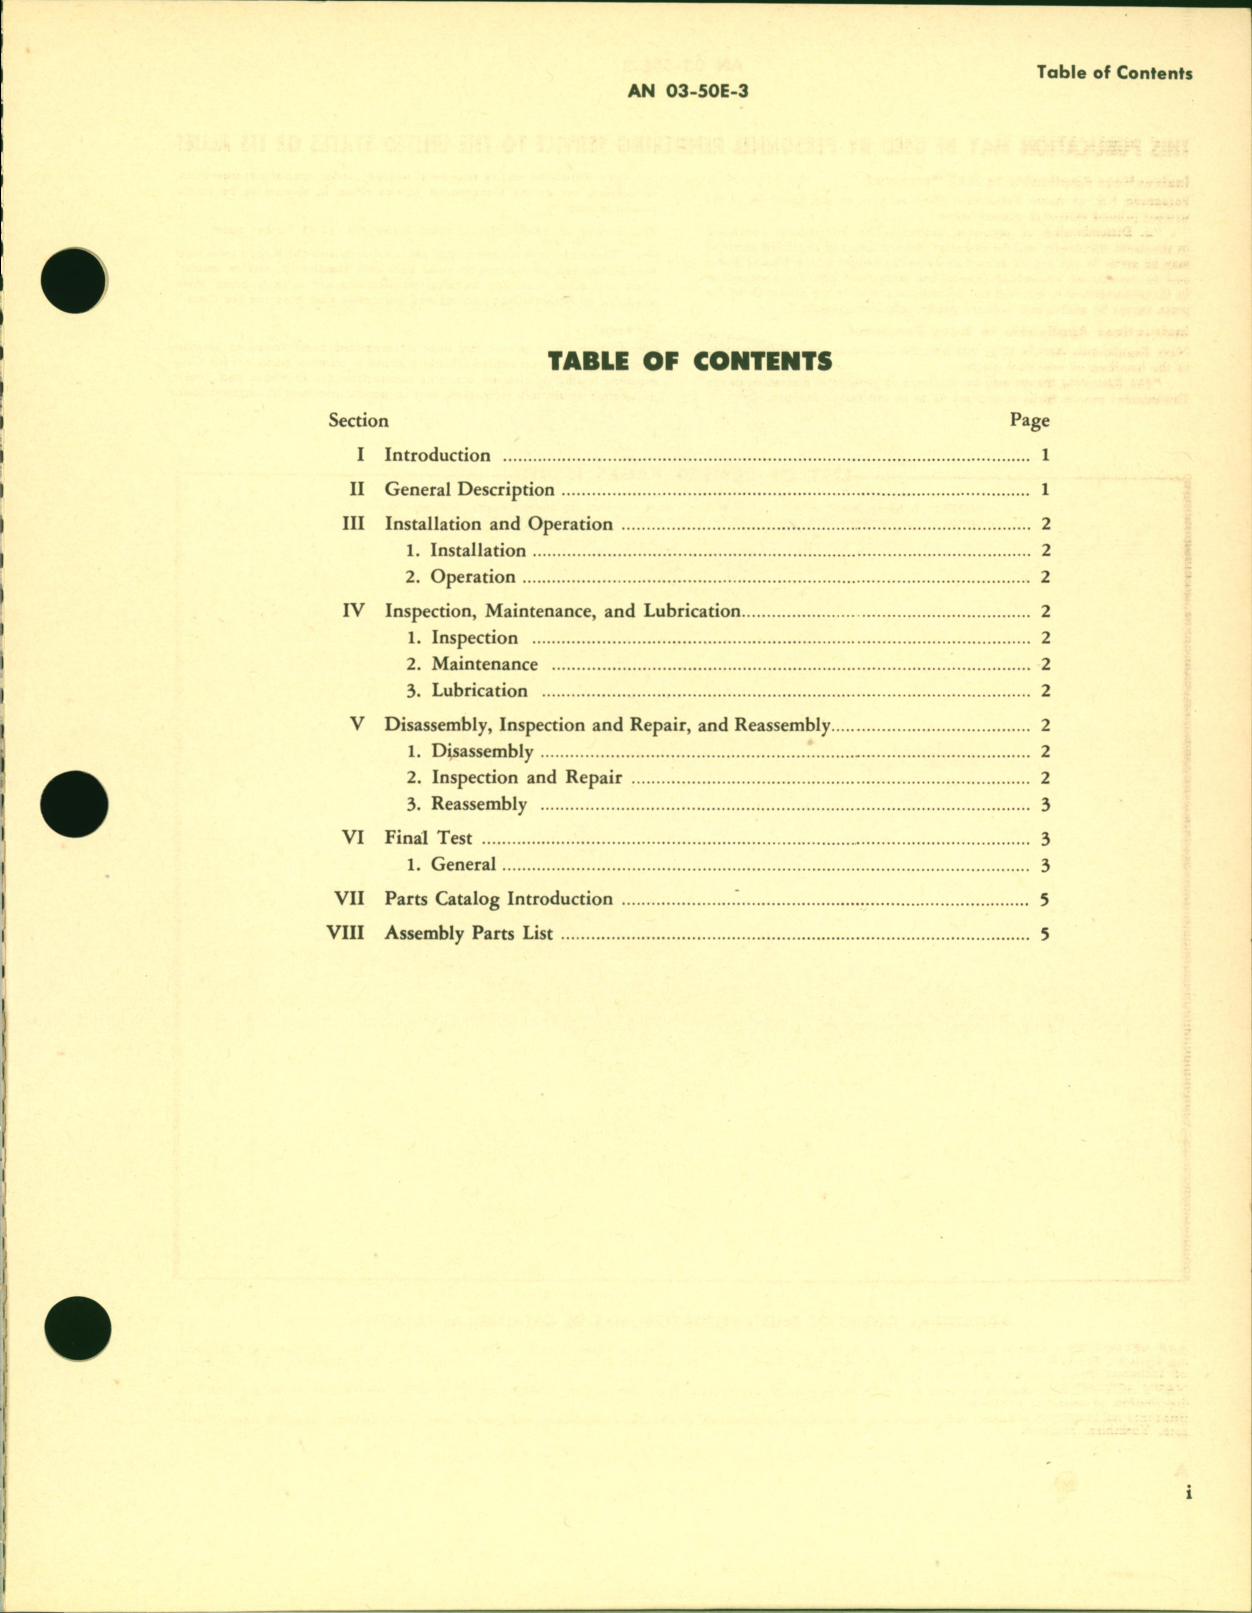 Sample page 3 from AirCorps Library document: Handbook of Instructions with Parts Catalog for Oxygen Line Valves Model 4352 Low Pressure